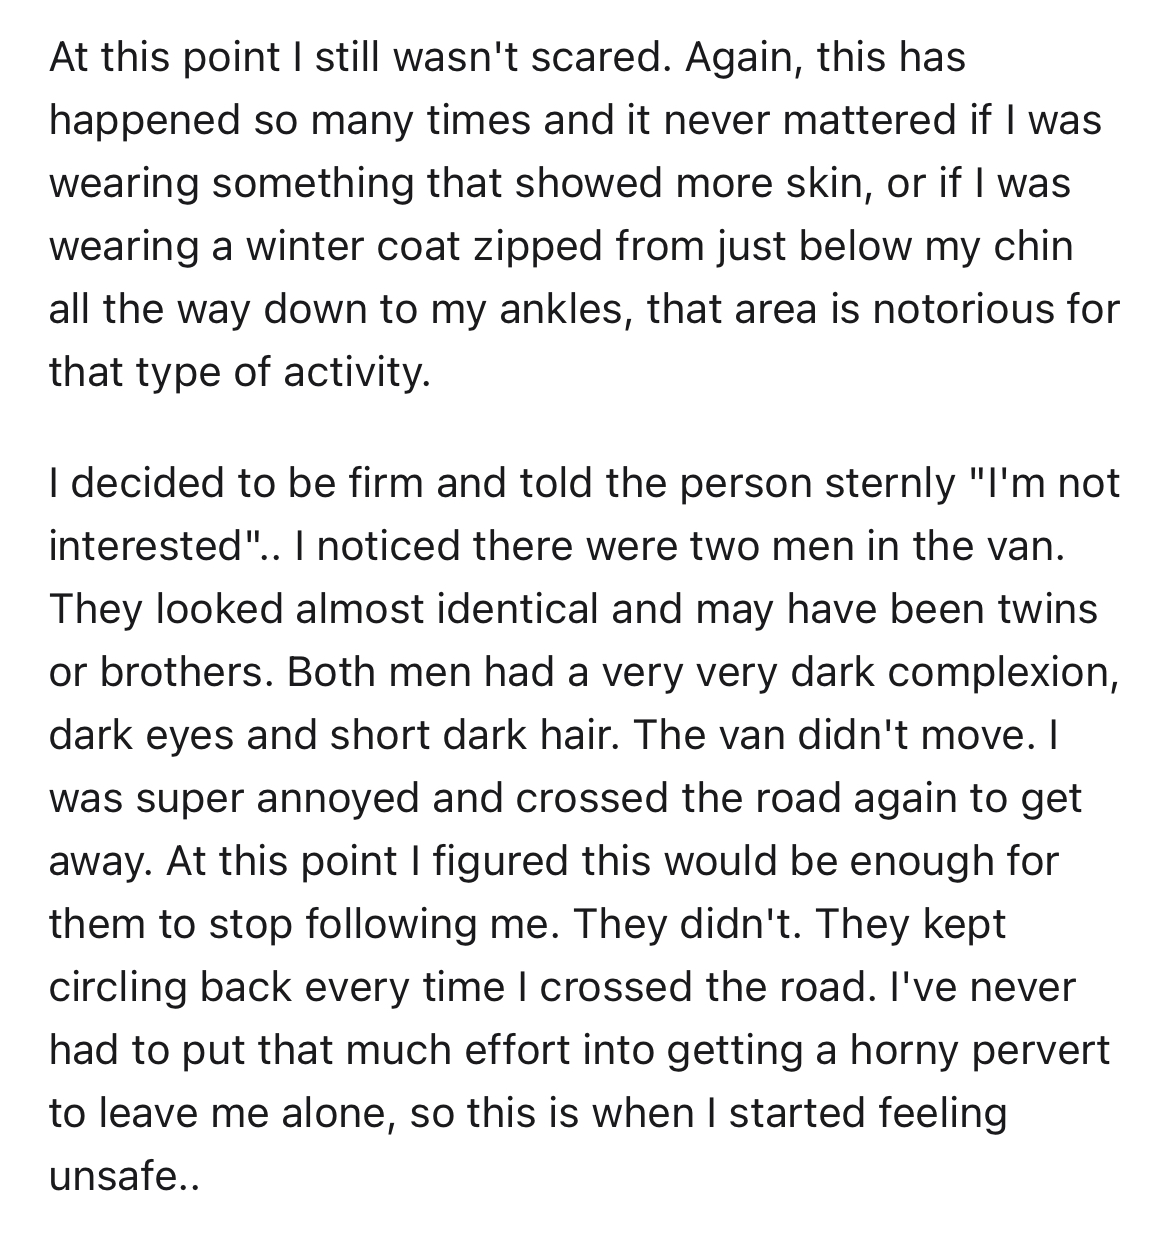 creepy van at night story - available - At this point I still wasn't scared. Again, this has happened so many times and it never mattered if I was wearing something that showed more skin, or if I was wearing a winter coat zipped from just below my chin al